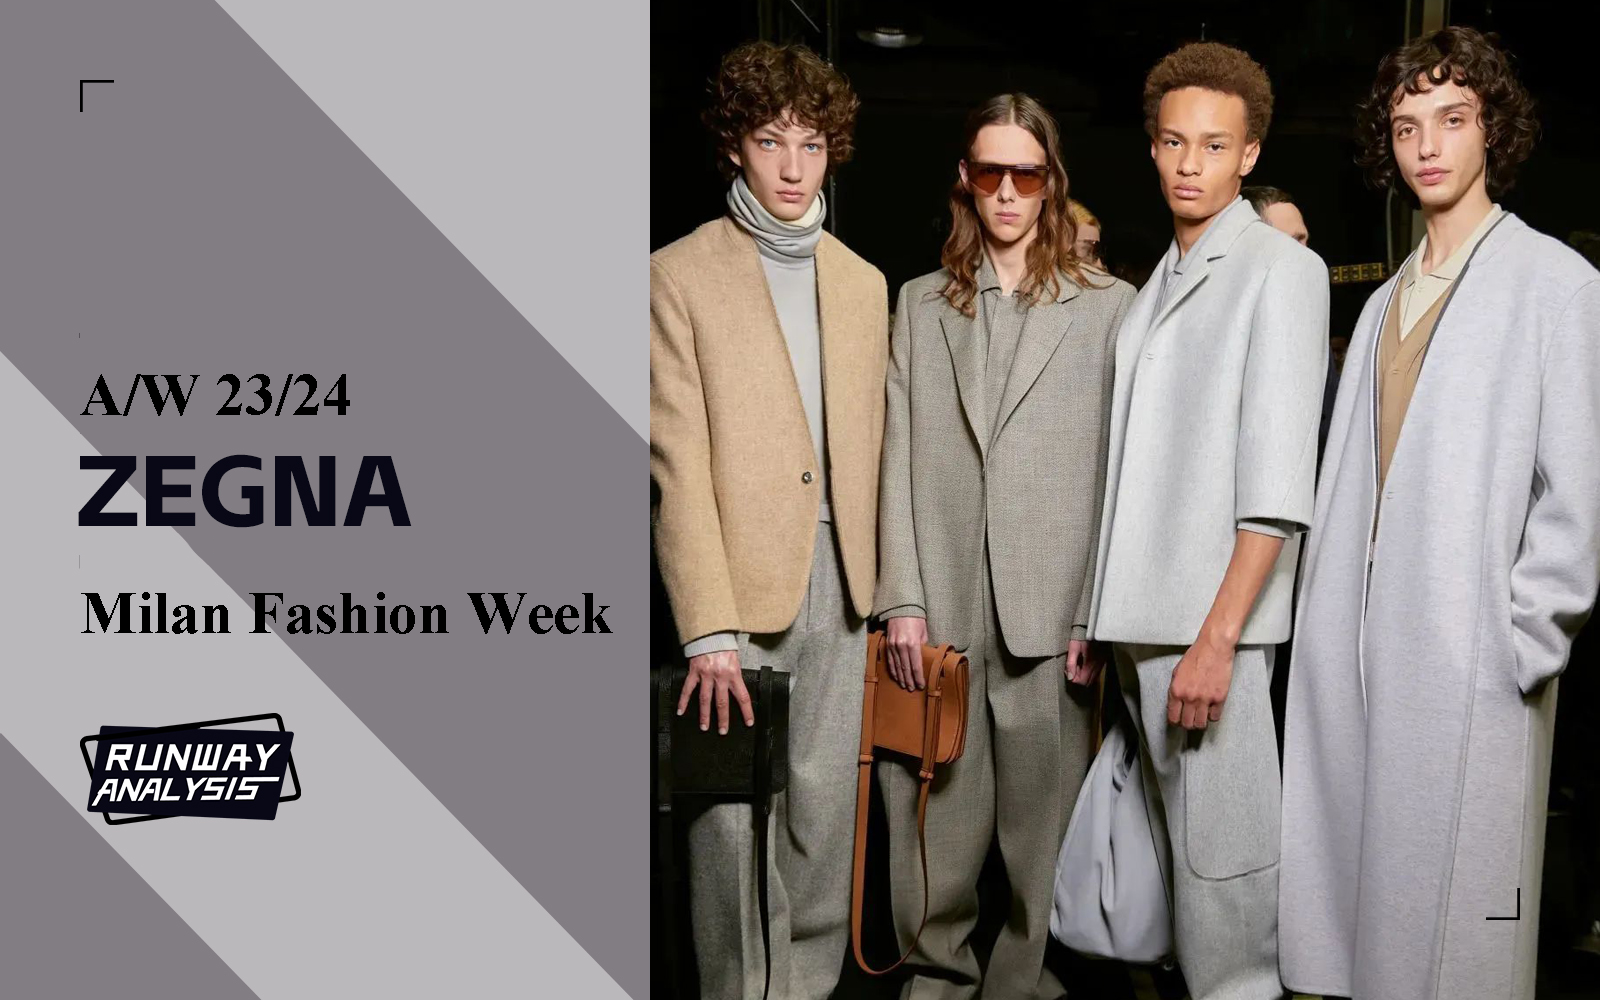 The Oasi of Cashmere -- The Menswear Runway Analysis of Zegna